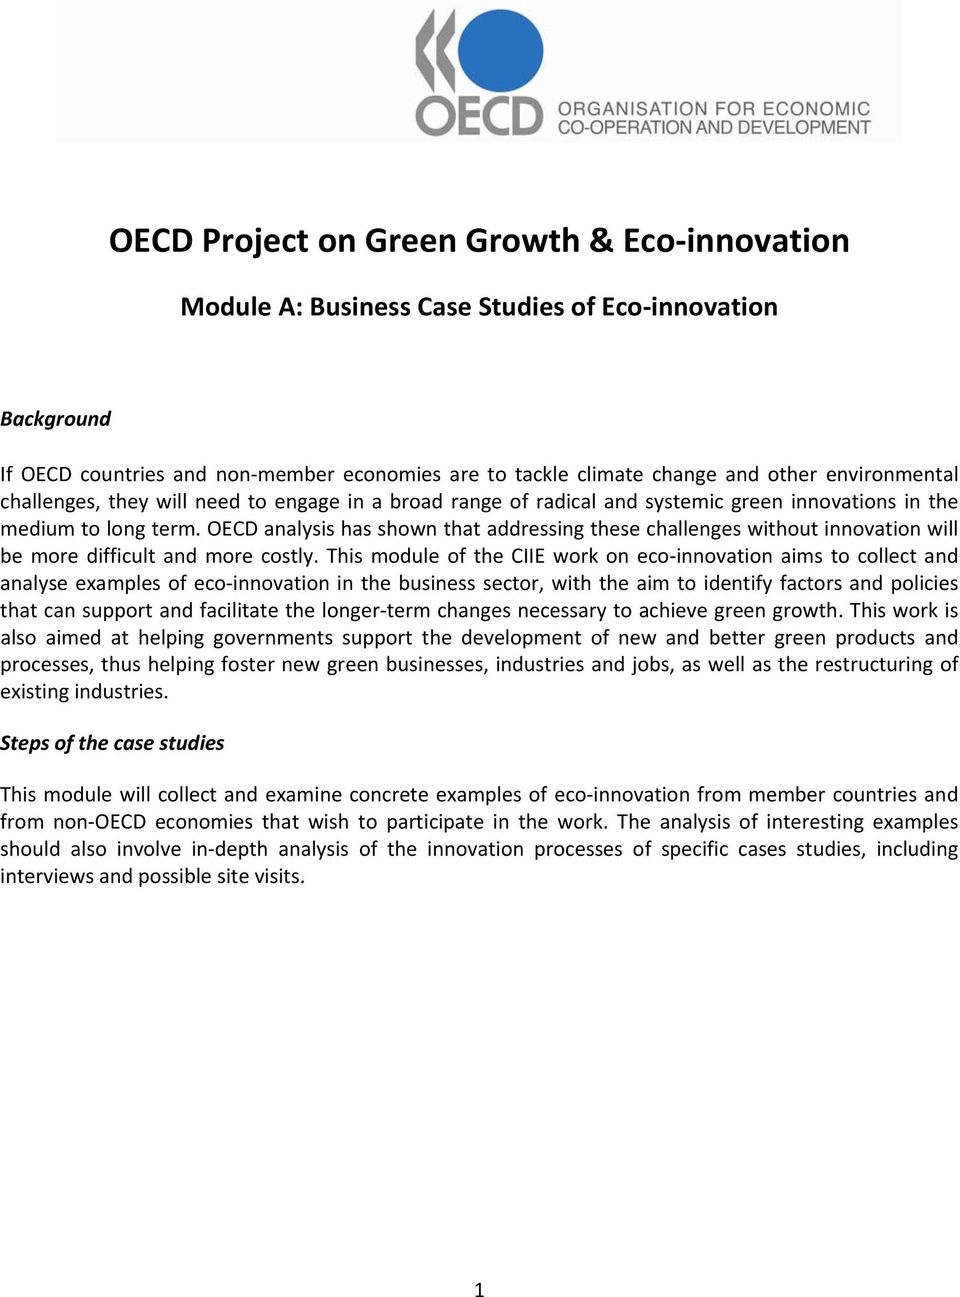 OECD analysis has shown that addressing these challenges without innovation will be more difficult and more costly.